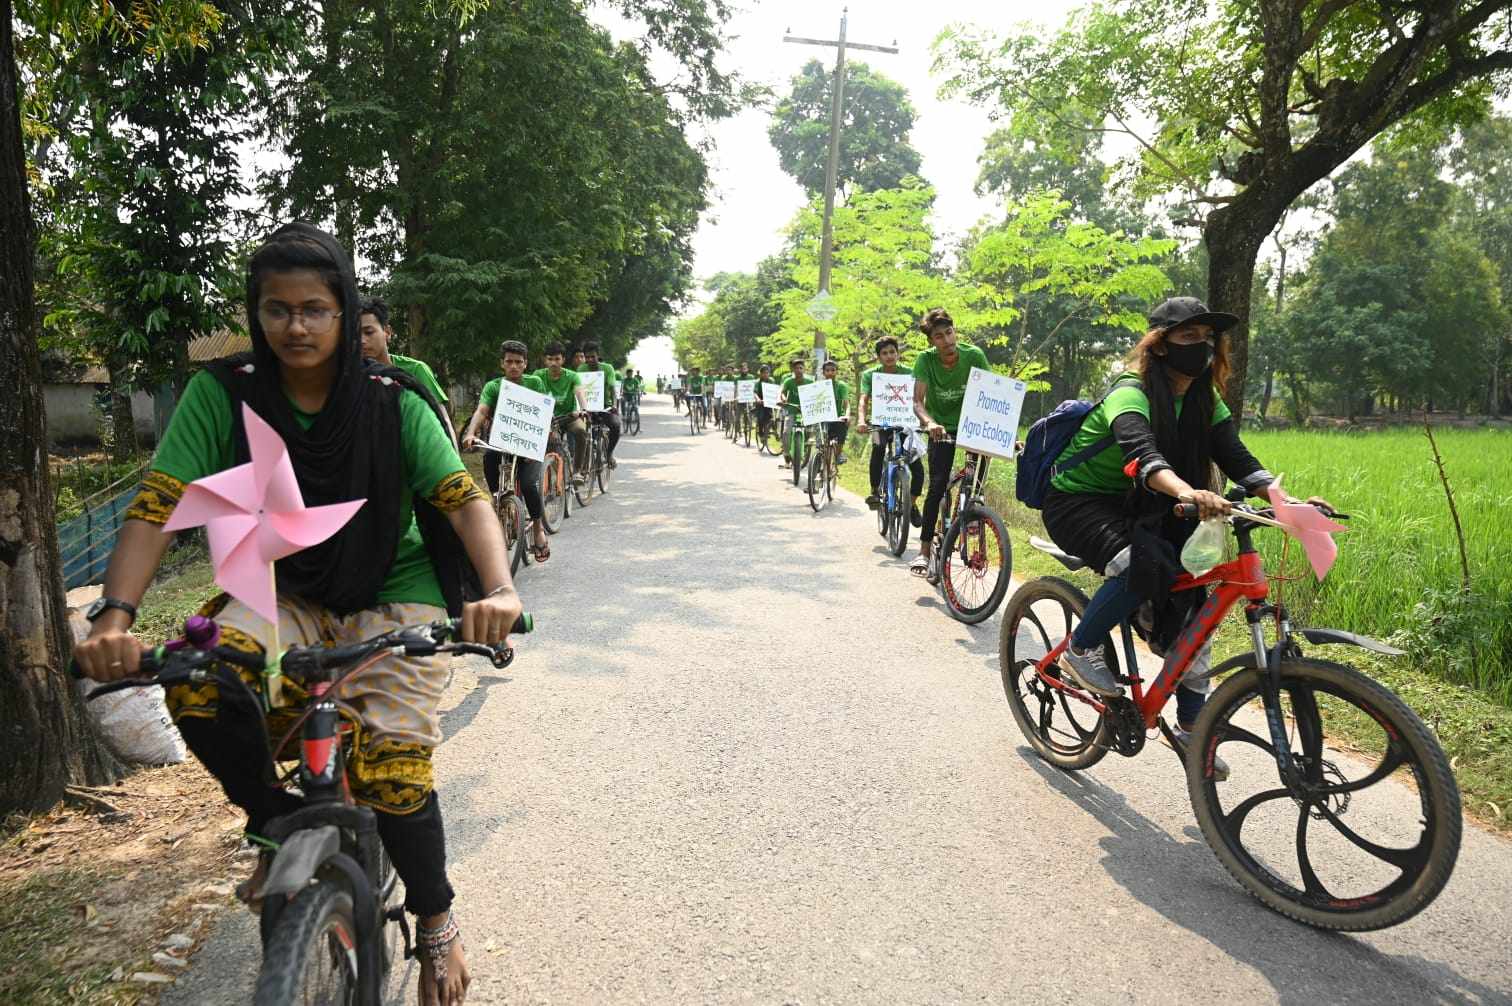 Satkhira, Bangladesh, November 3: led by women's movements, activists from all ages are calling no more fossil fuels. To demand more investments in renewables, they organized several actions throughout the day, including a bike protest. Photo credit: BINDU Nari Unnayan Sangathan